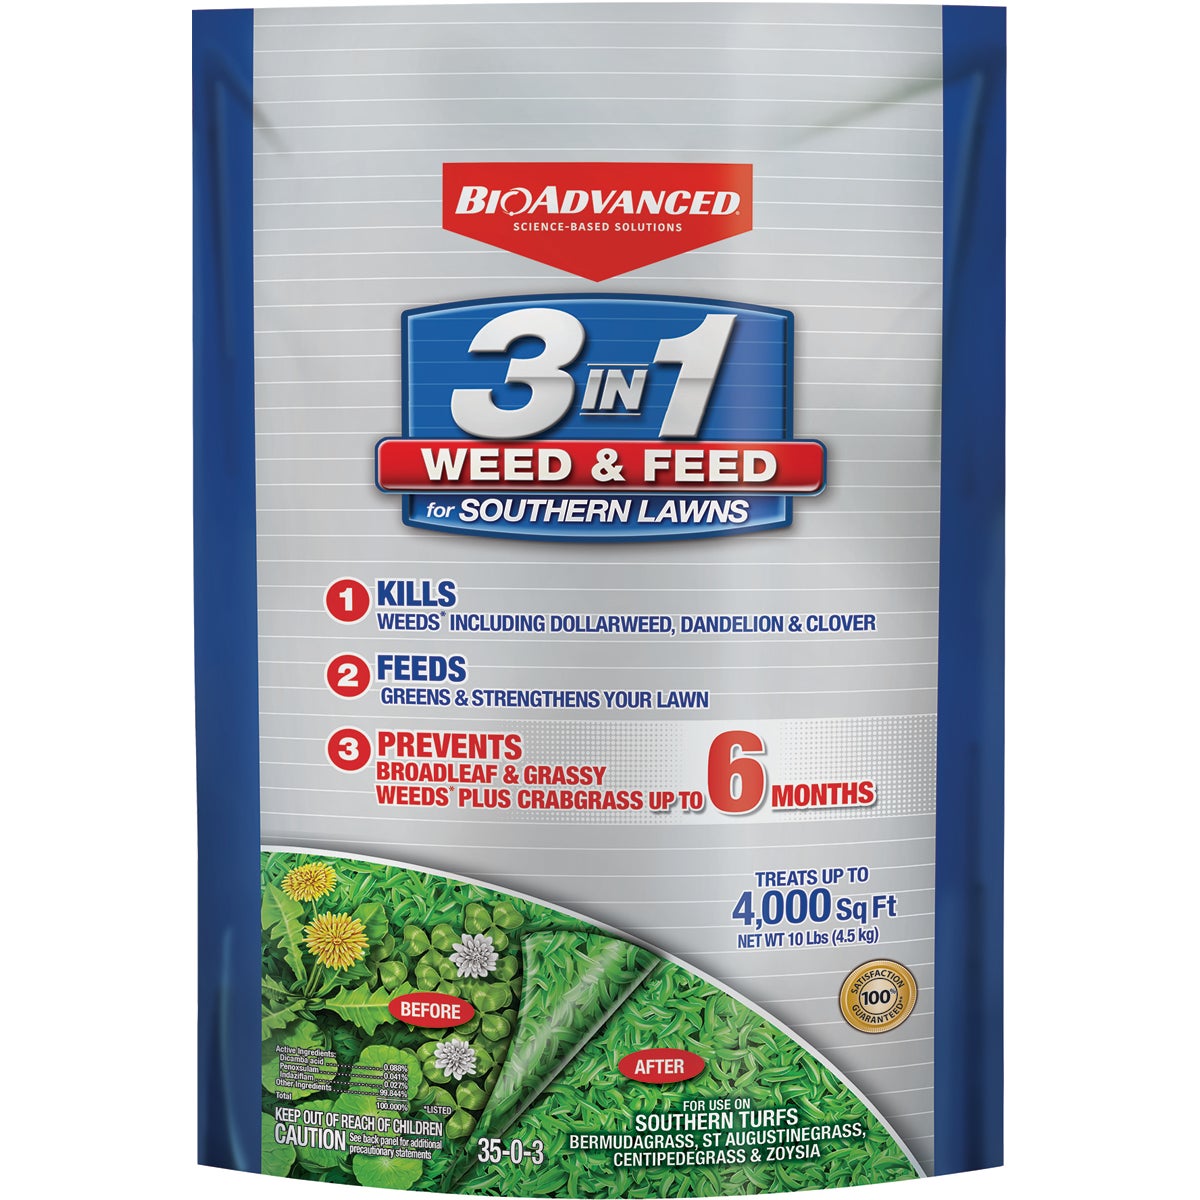 BioAdvanced 3-In-1 Weed & Feed for Southern Lawns 10 Lb. 4000 Sq. Ft. 35-0-3 Lawn Fertilizer with Weed Killer